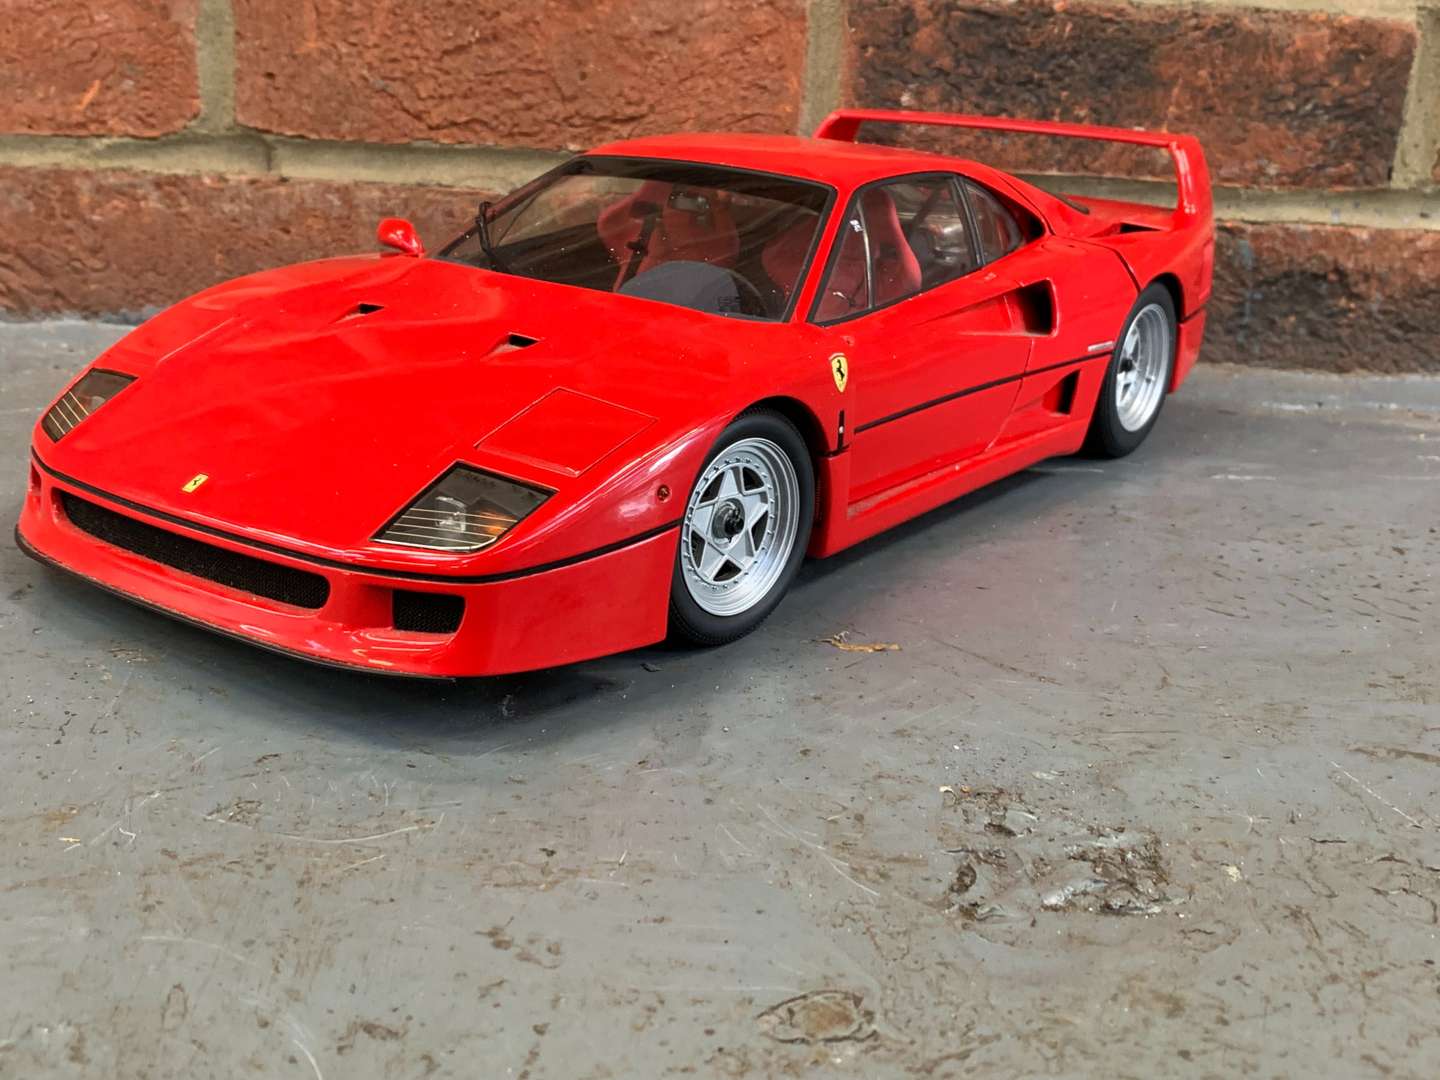 <p>Kyosho Die Cast F40 1:12 Scale Model</p>